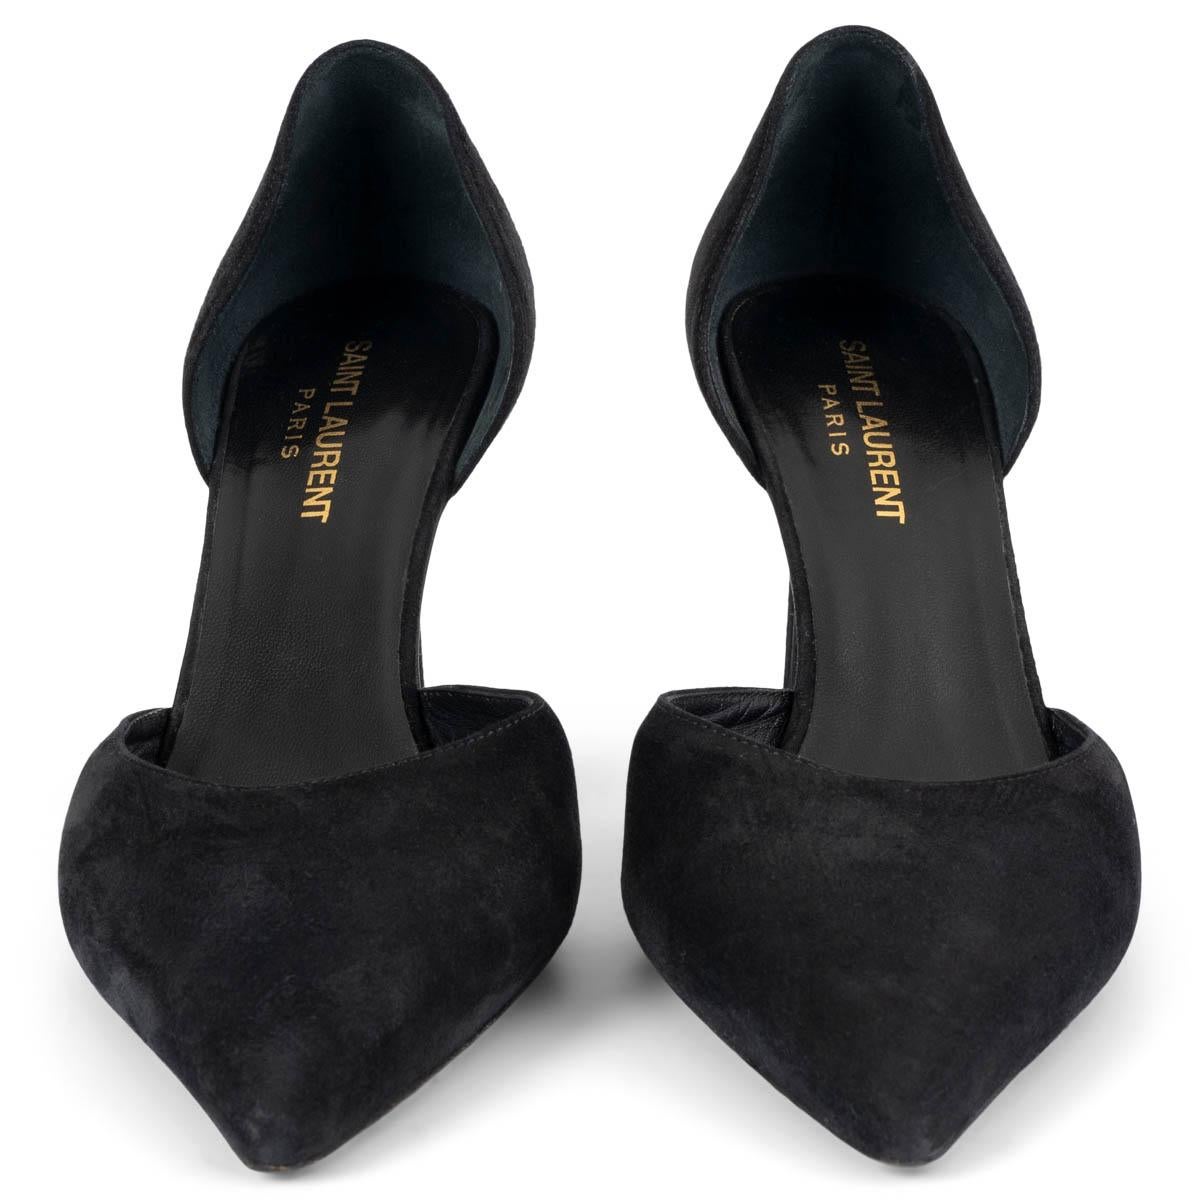 100% authentic Saint Laurent D'Orsay pointed-toe pumps in black suede. Open on the side. Have been worn and are in excellent condition. Come with dust bag. 

Measurements
Imprinted Size	37.5
Shoe Size	37.5
Inside Sole	24.5cm (9.6in)
Width	7.5cm